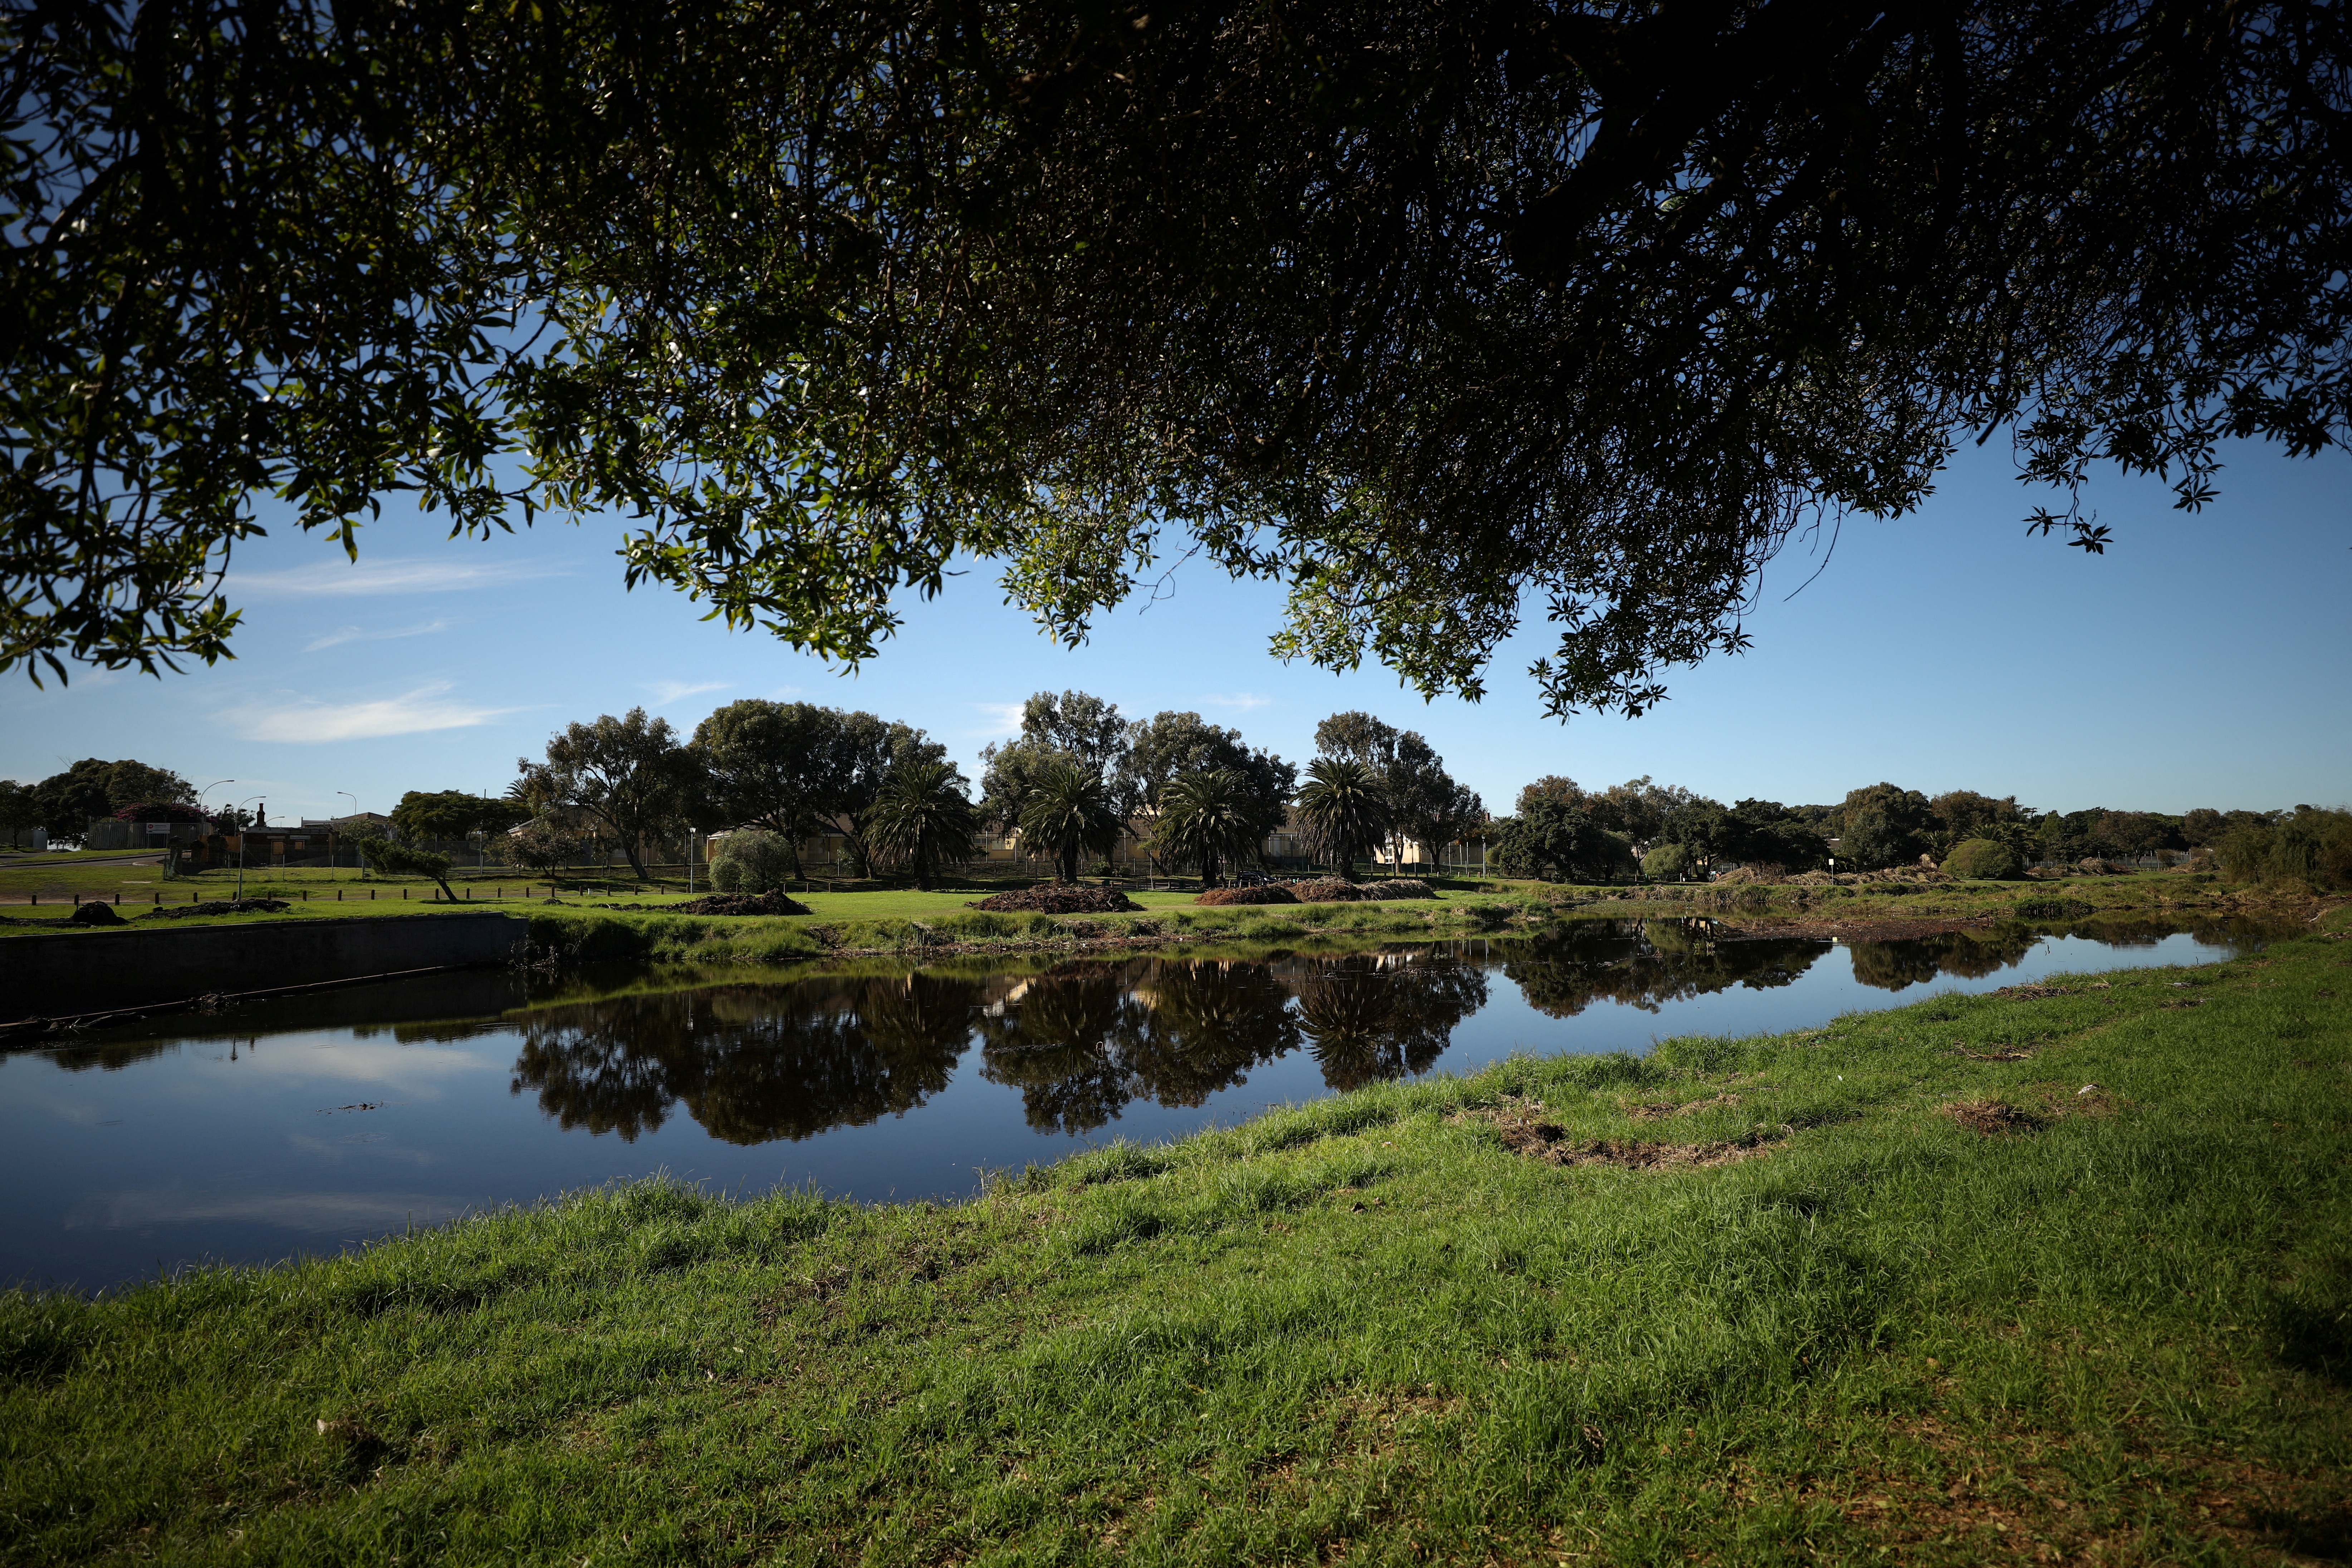 Trees line the banks of the historically significant Liesbeek River in Cape Town